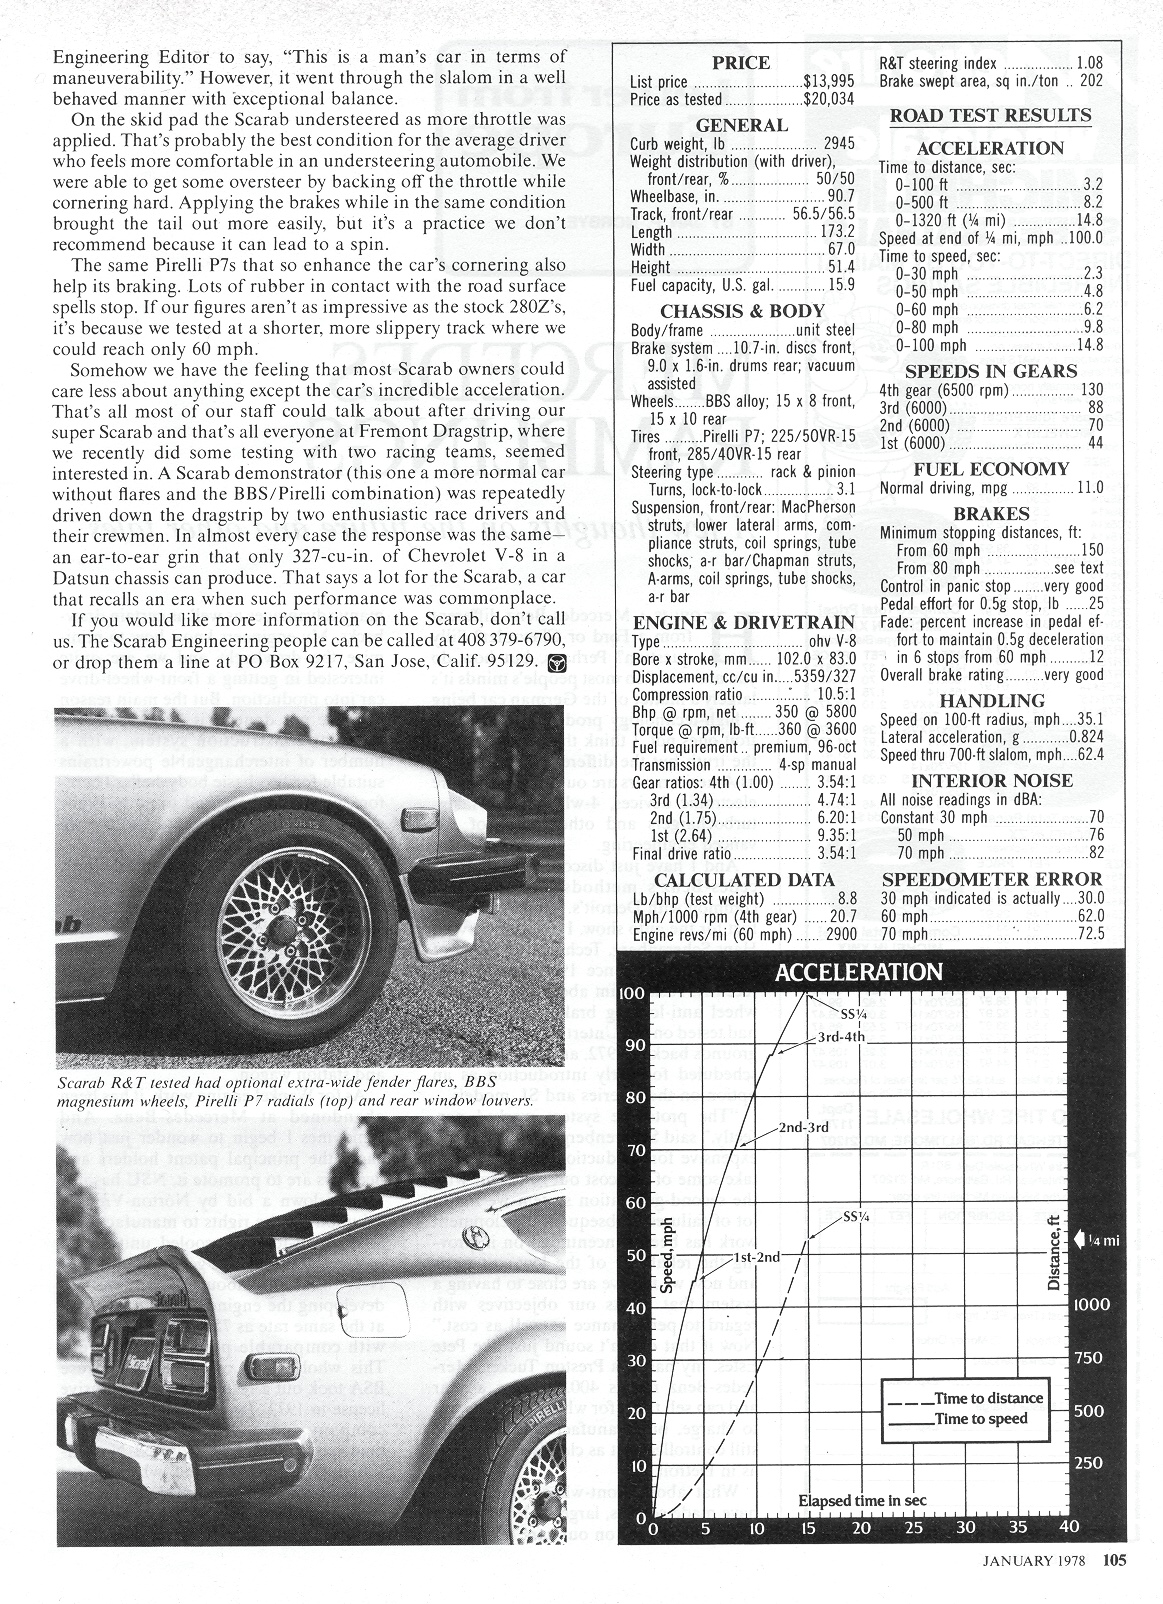 January 1978 Road and Track Scarab3